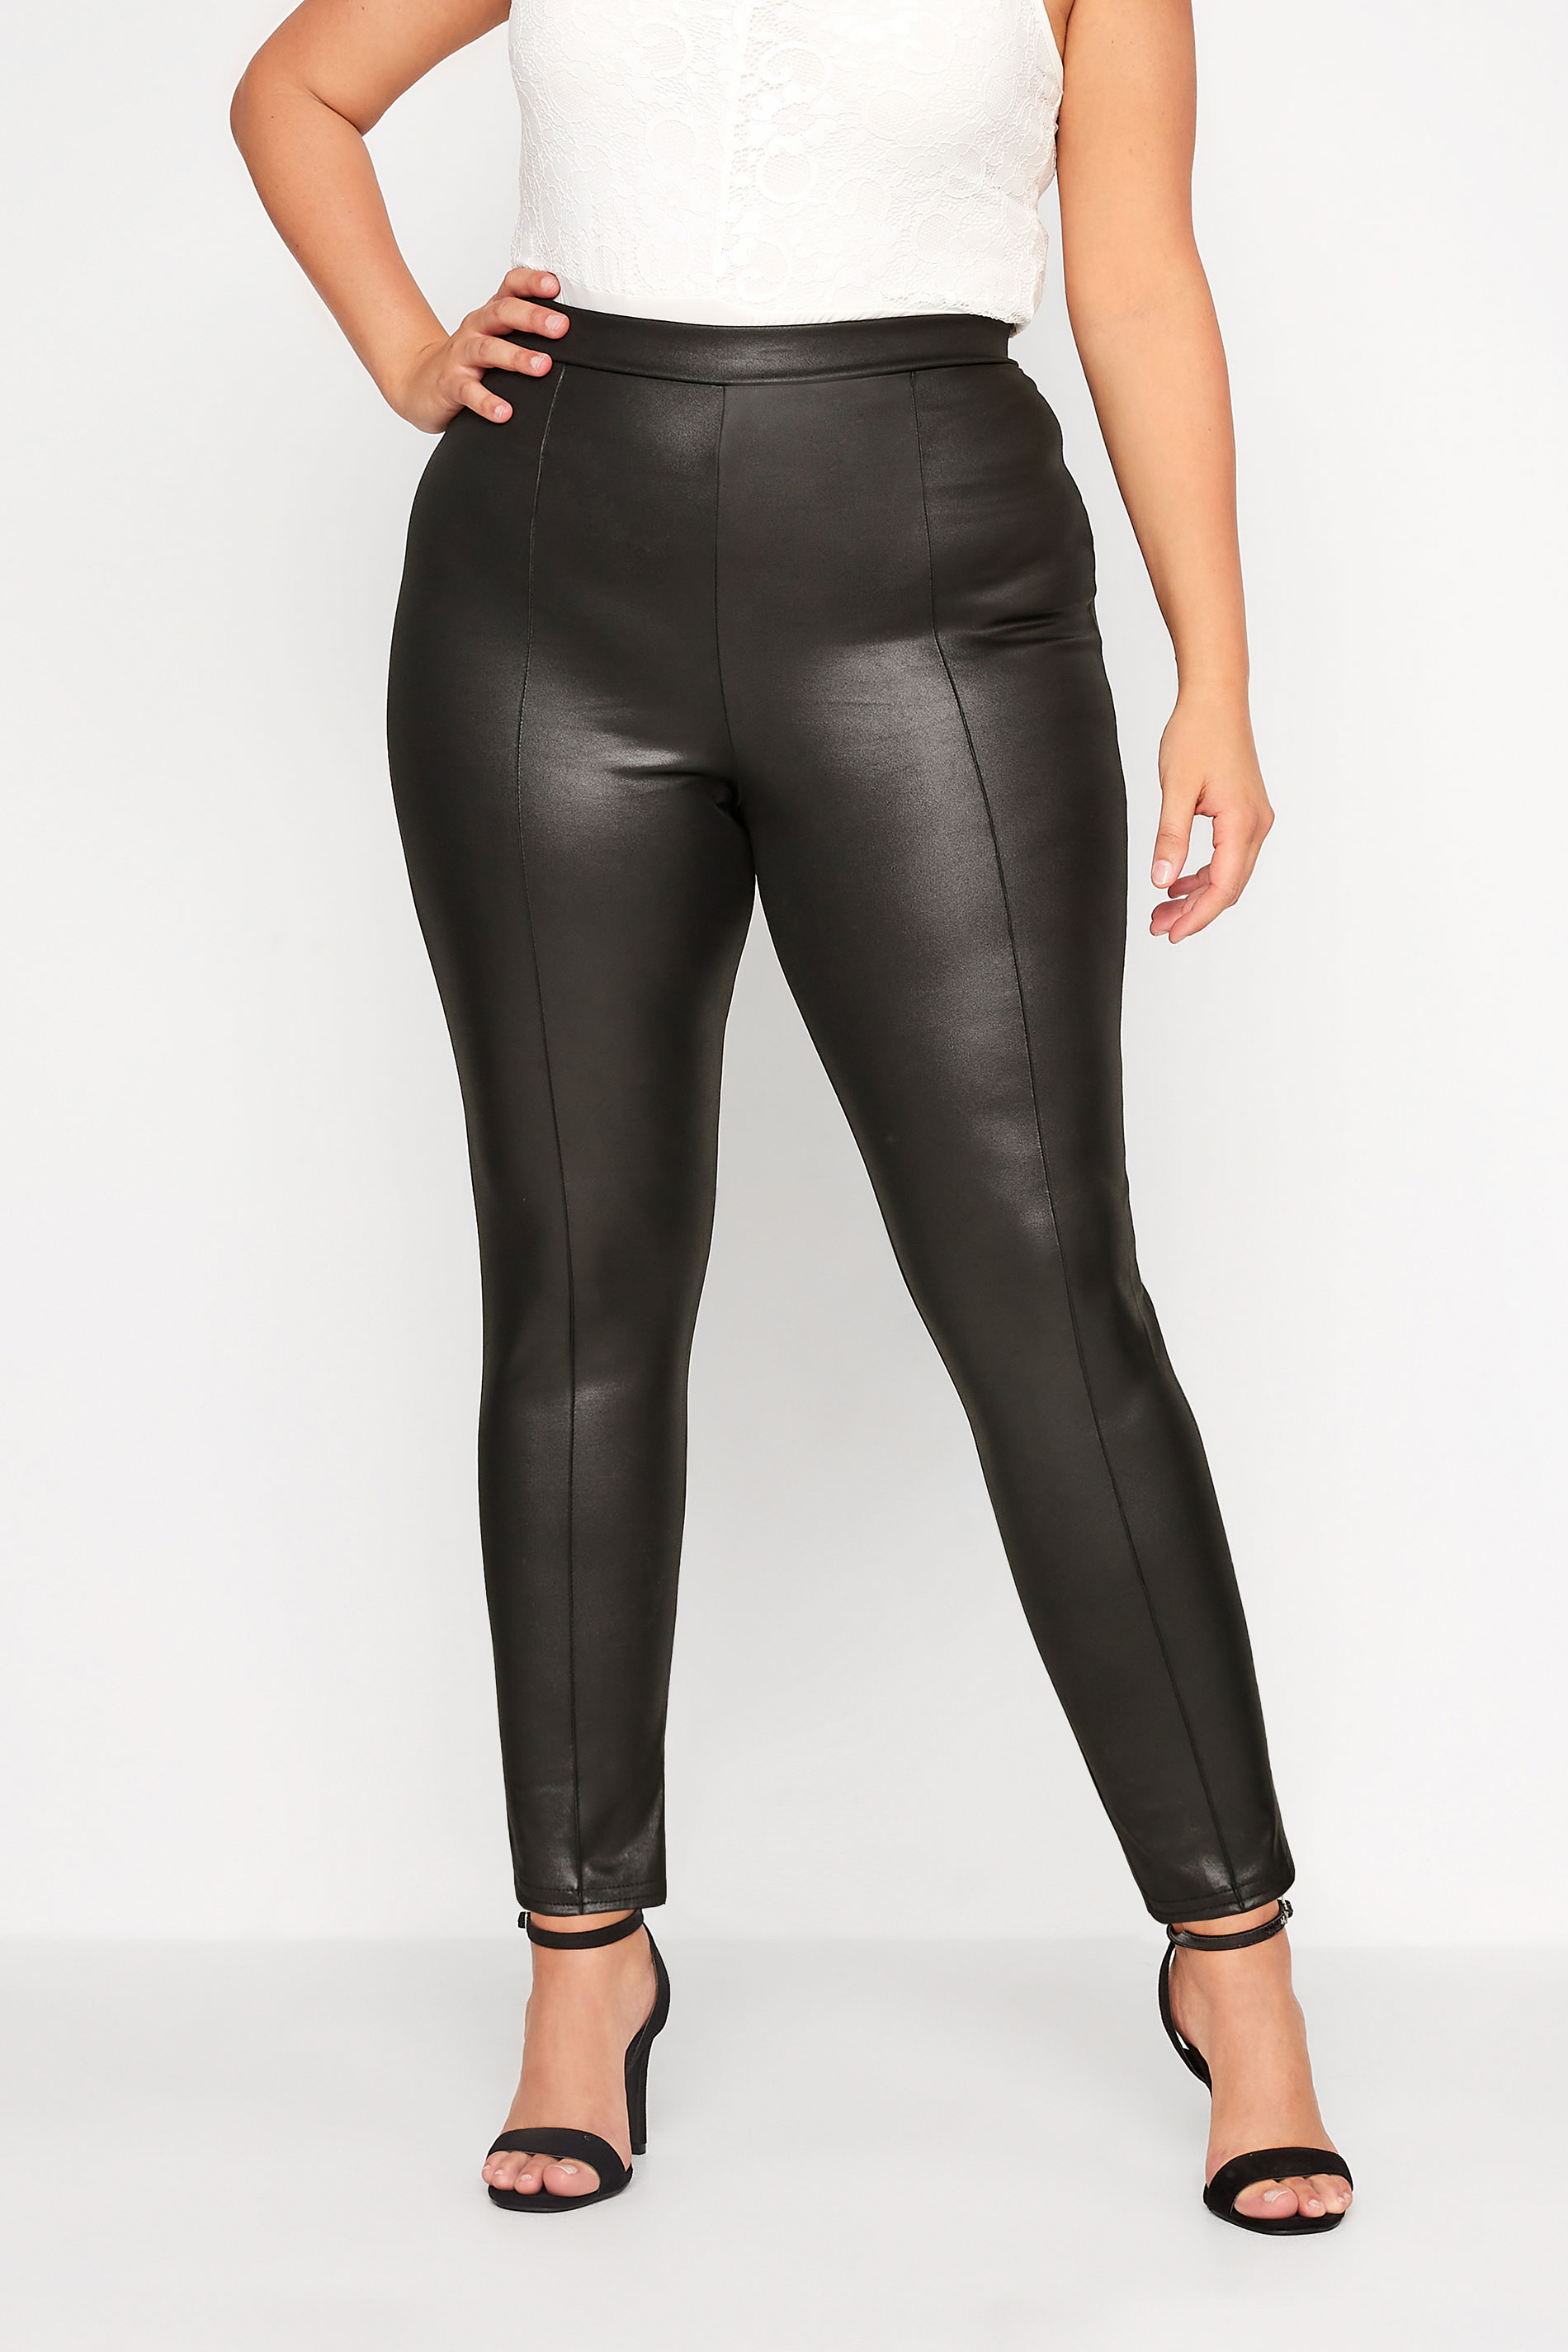 YOURS LONDON Plus Size Black Front Seam Stretch Leather Look Leggings | Yours Clothing  1